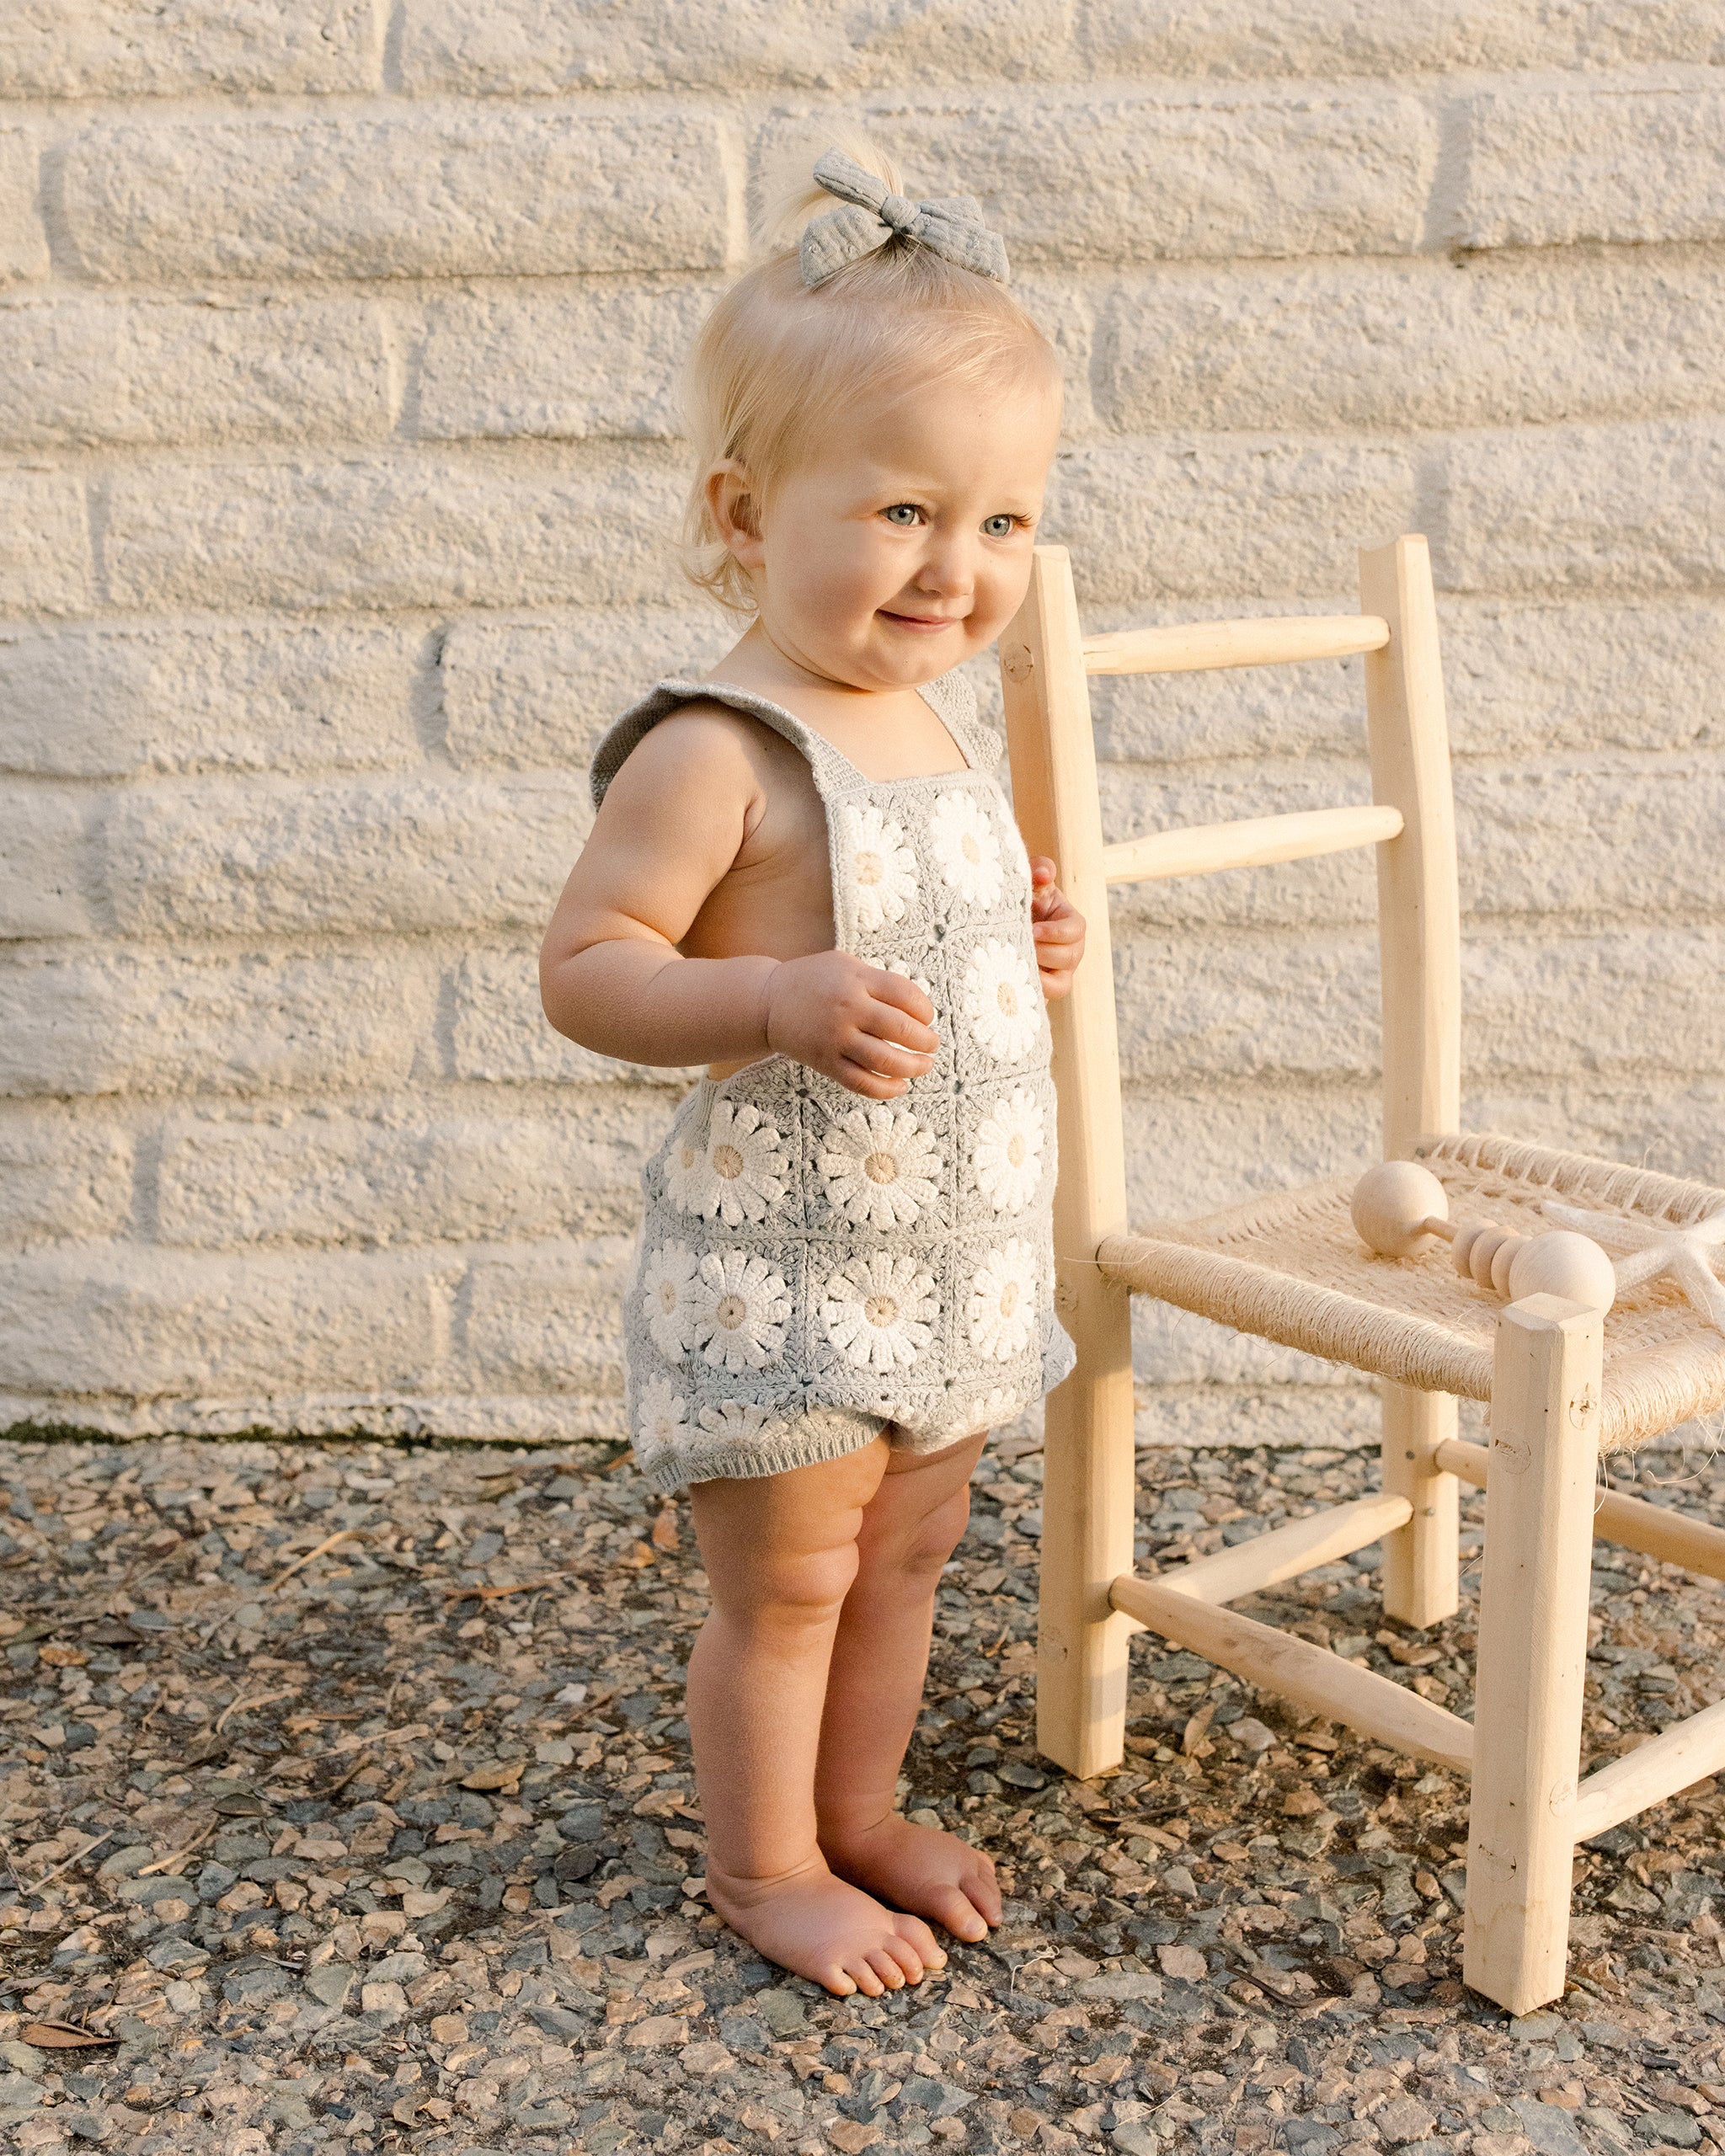 Crochet Romper || Daisy - Rylee + Cru | Kids Clothes | Trendy Baby Clothes | Modern Infant Outfits |